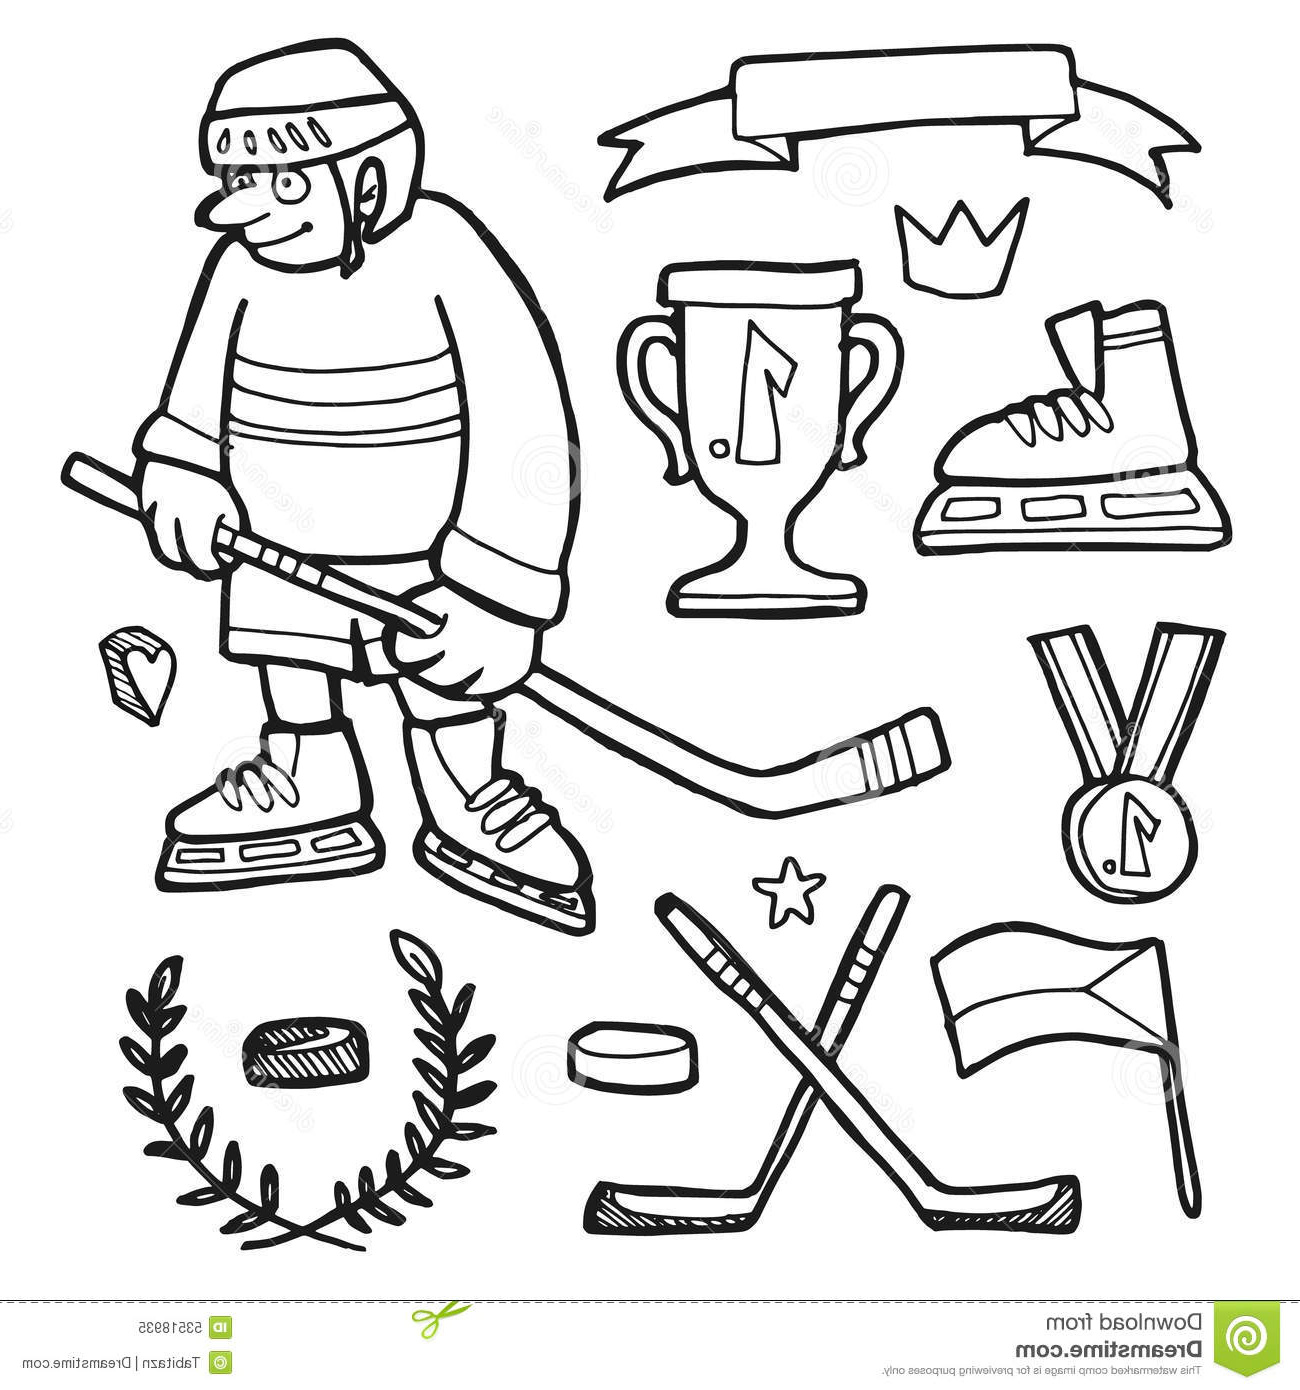 Dessin Hockey Cool Galerie Set Ic Hand Drawn Ice Hockey Doodle Sketches Stock